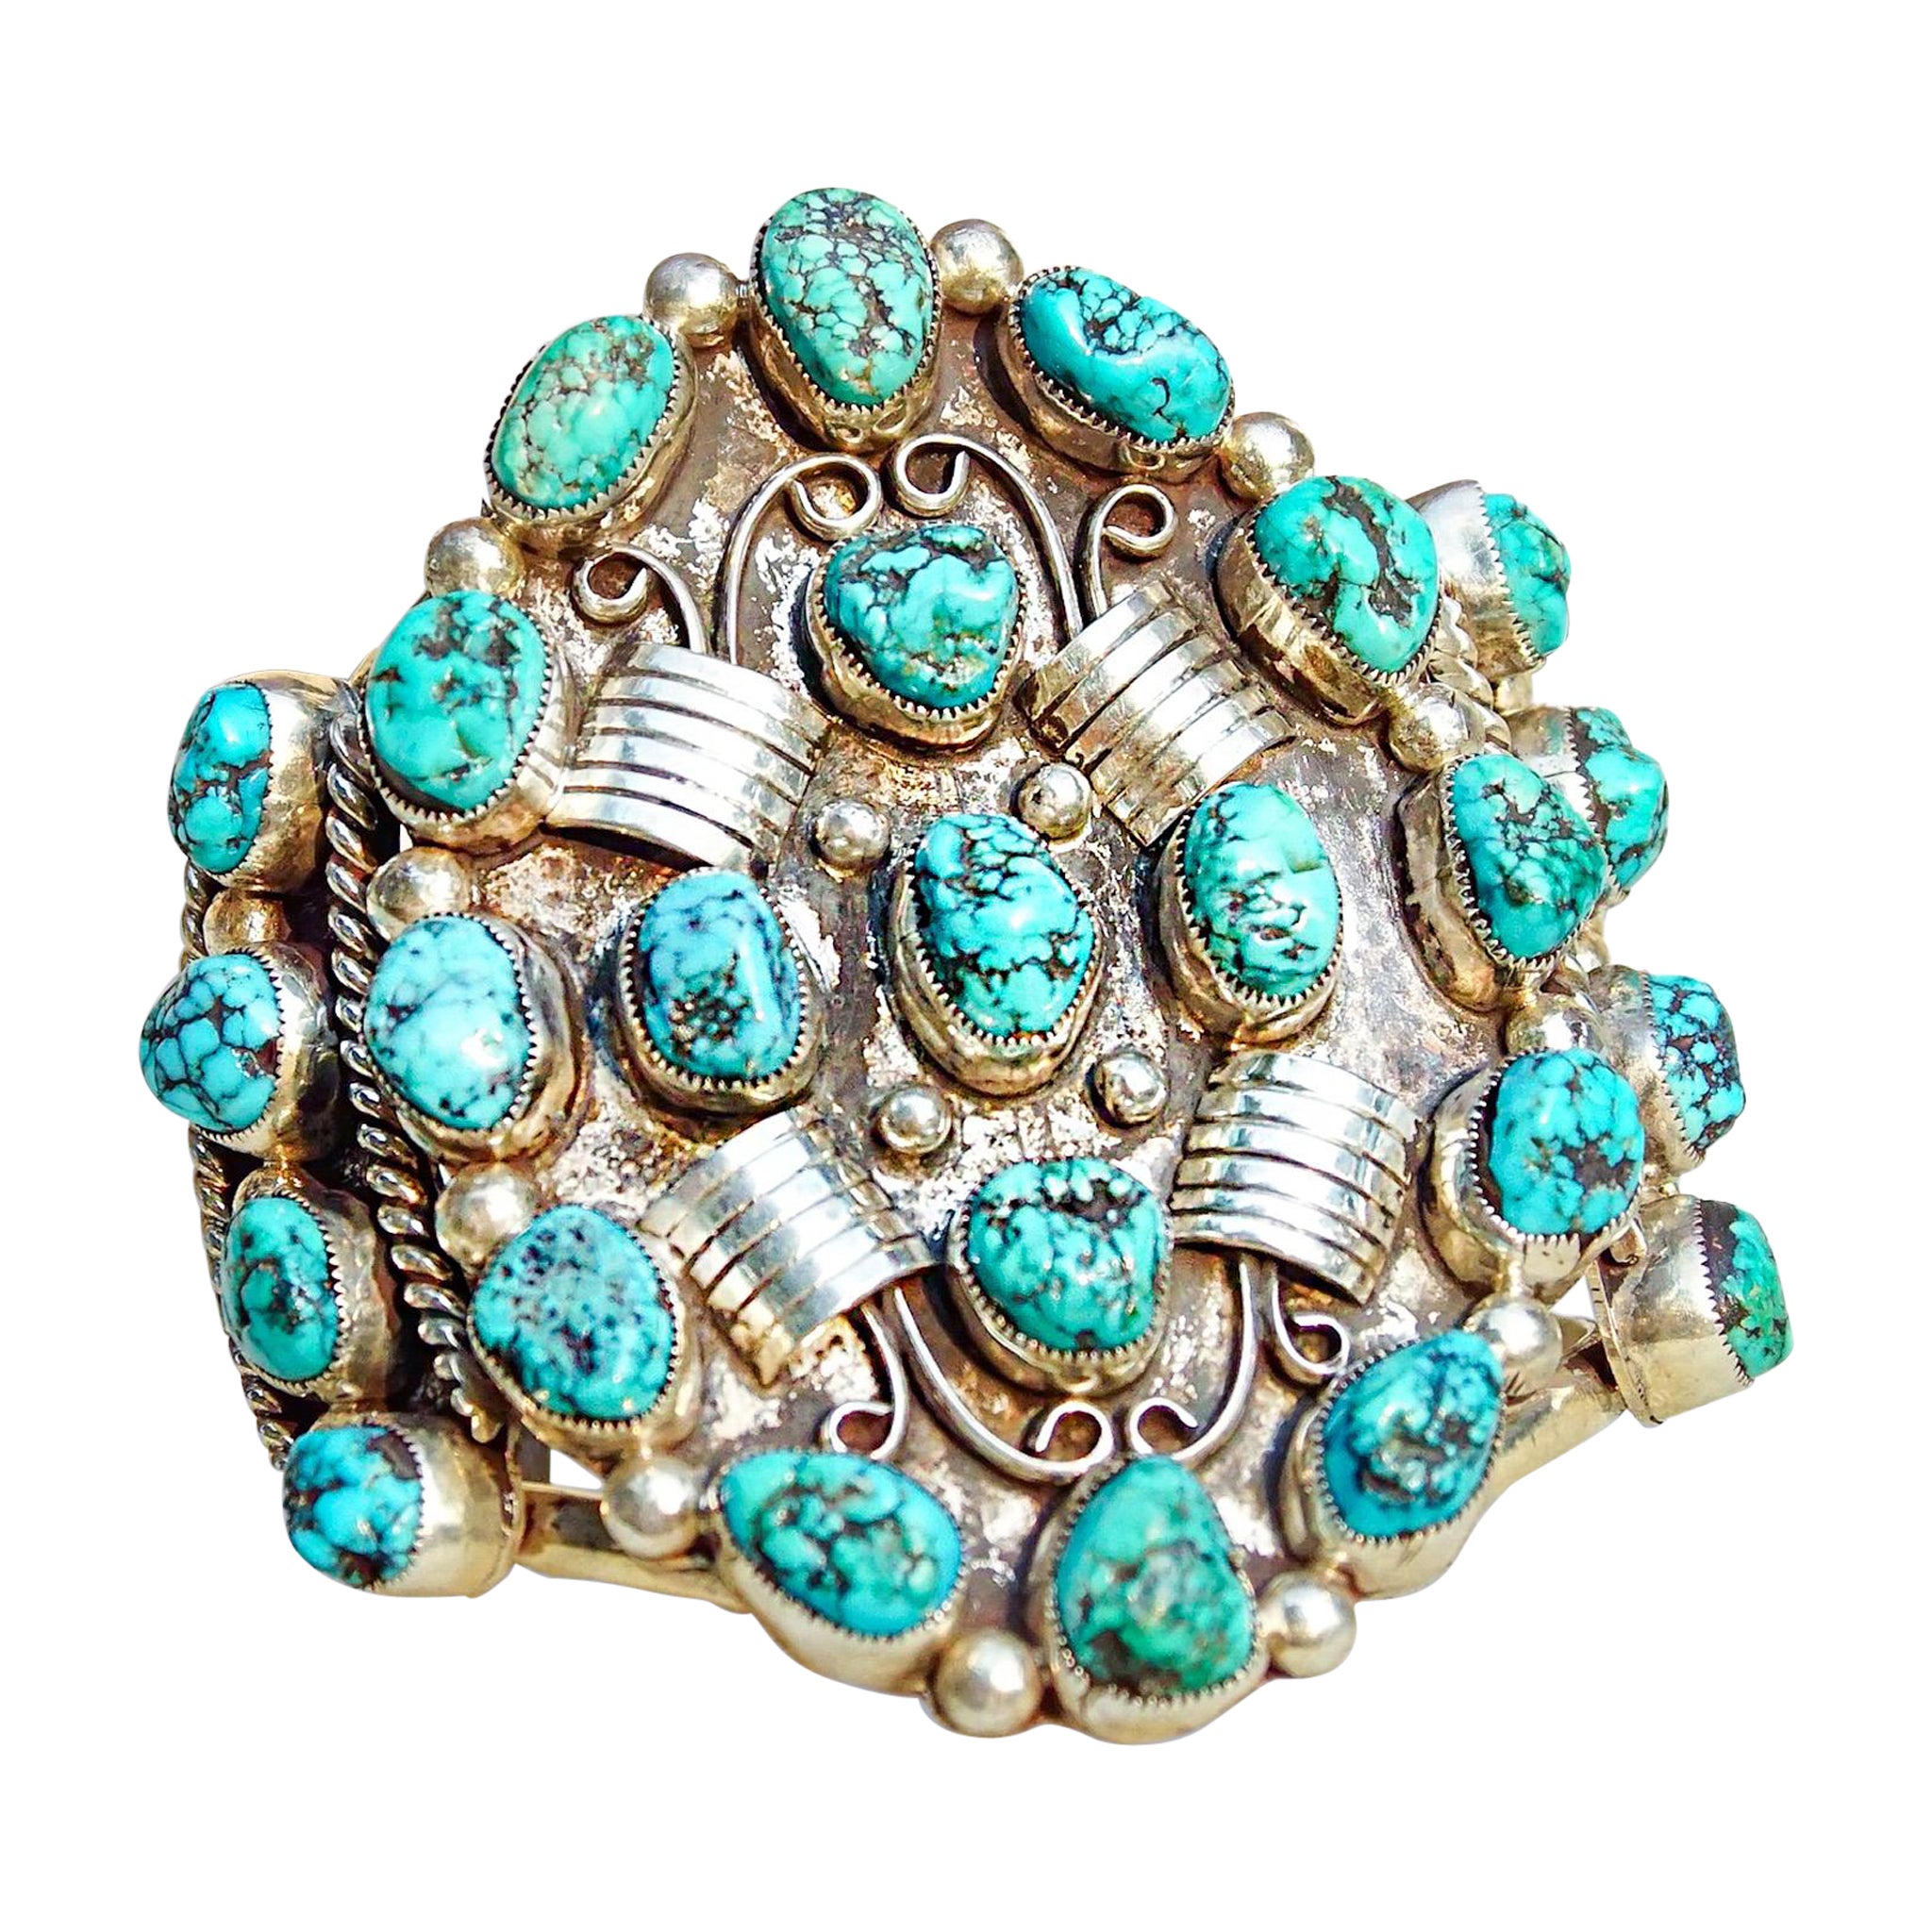 Pat Platero HUGE Navajo Sterling Silver Turquoise Cluster Cuff Bracelet For Sale